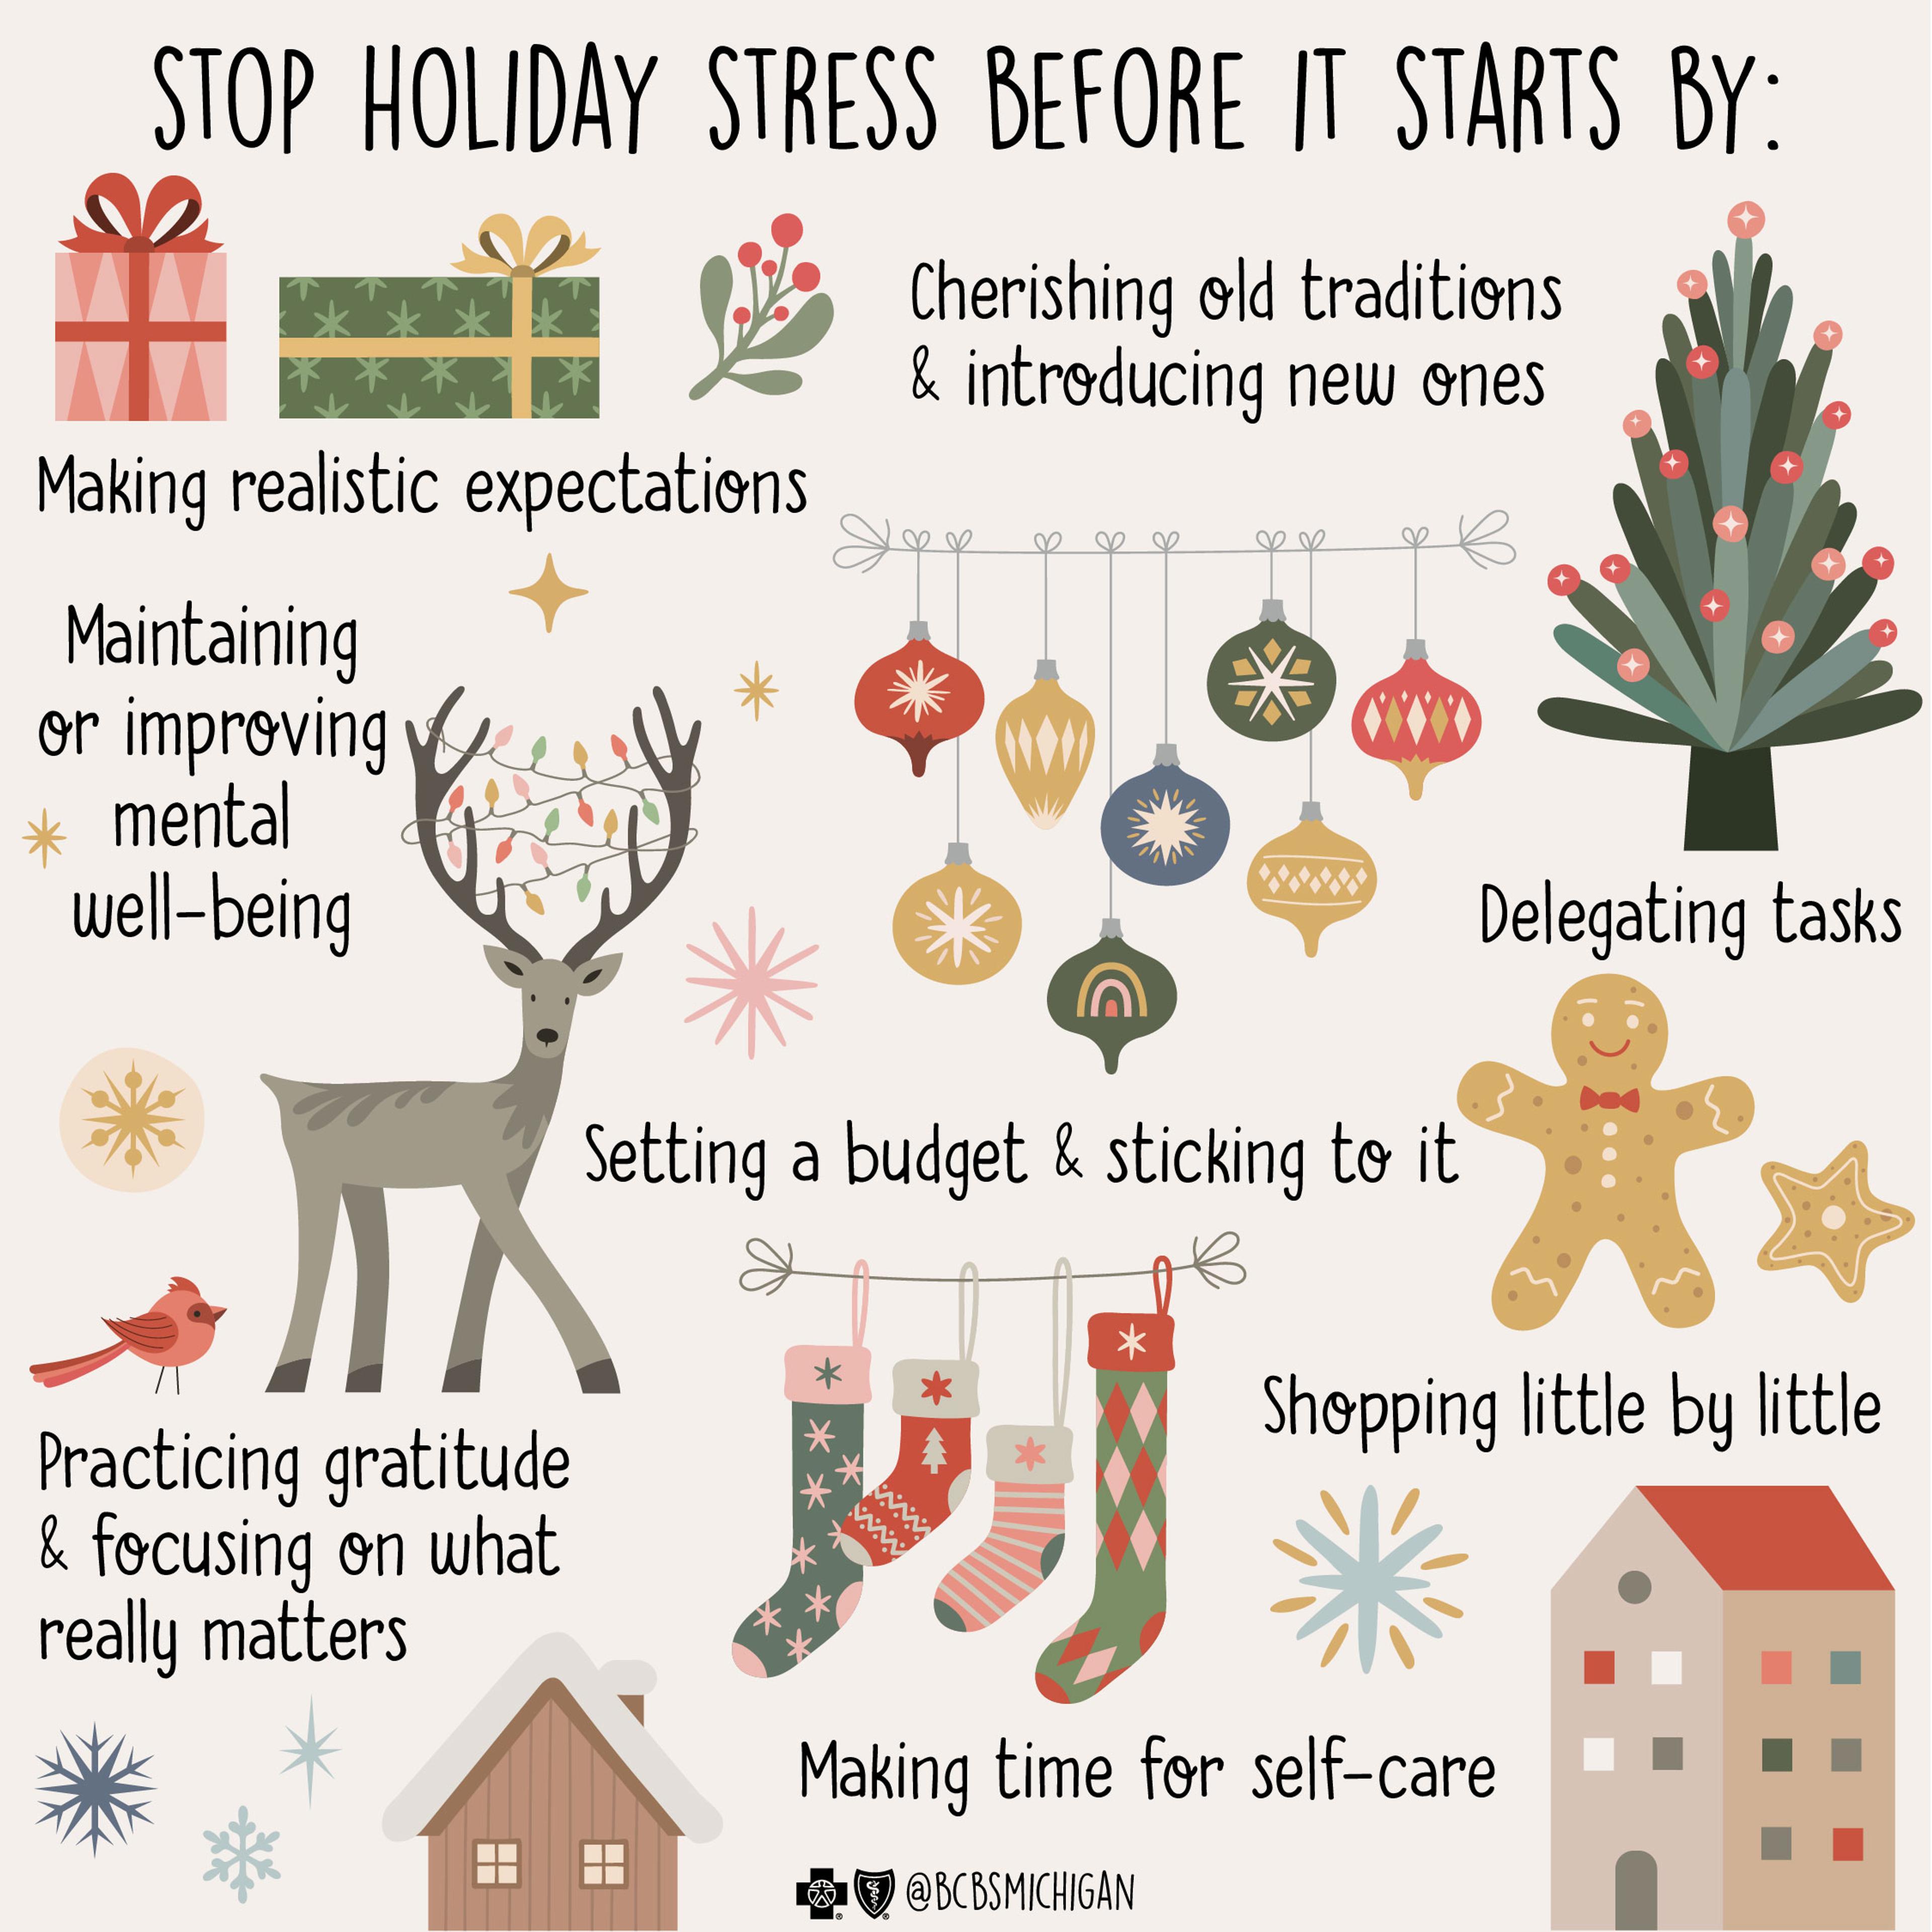 Tips to stop holiday stress